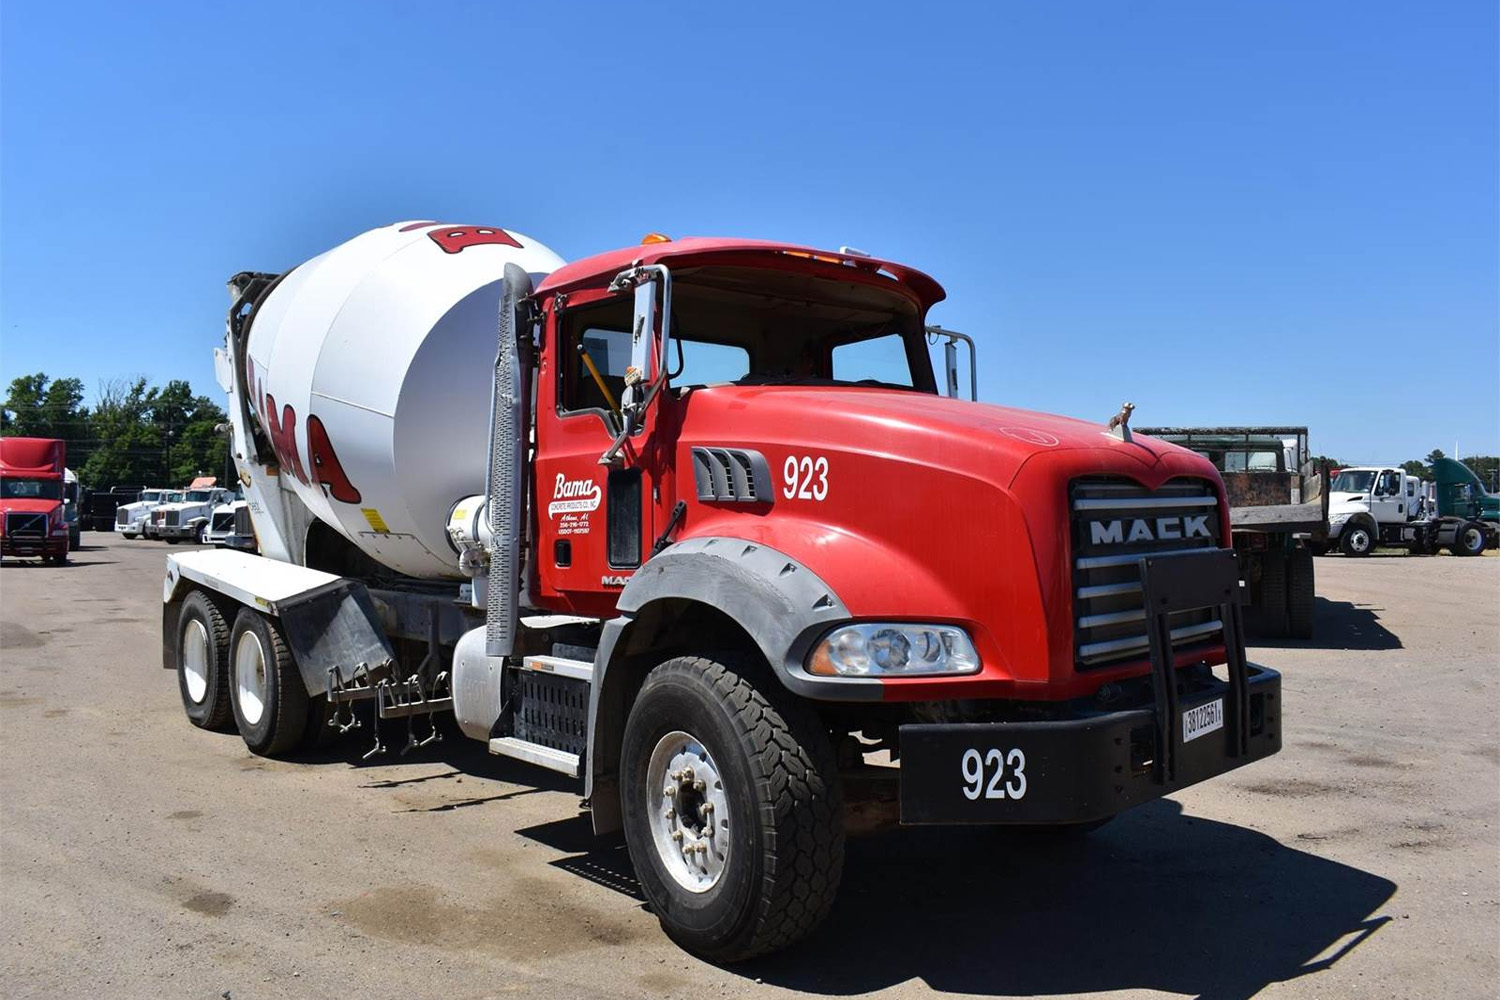 Rear pouring 8-10 yard capacity concrete truck made by Mack.